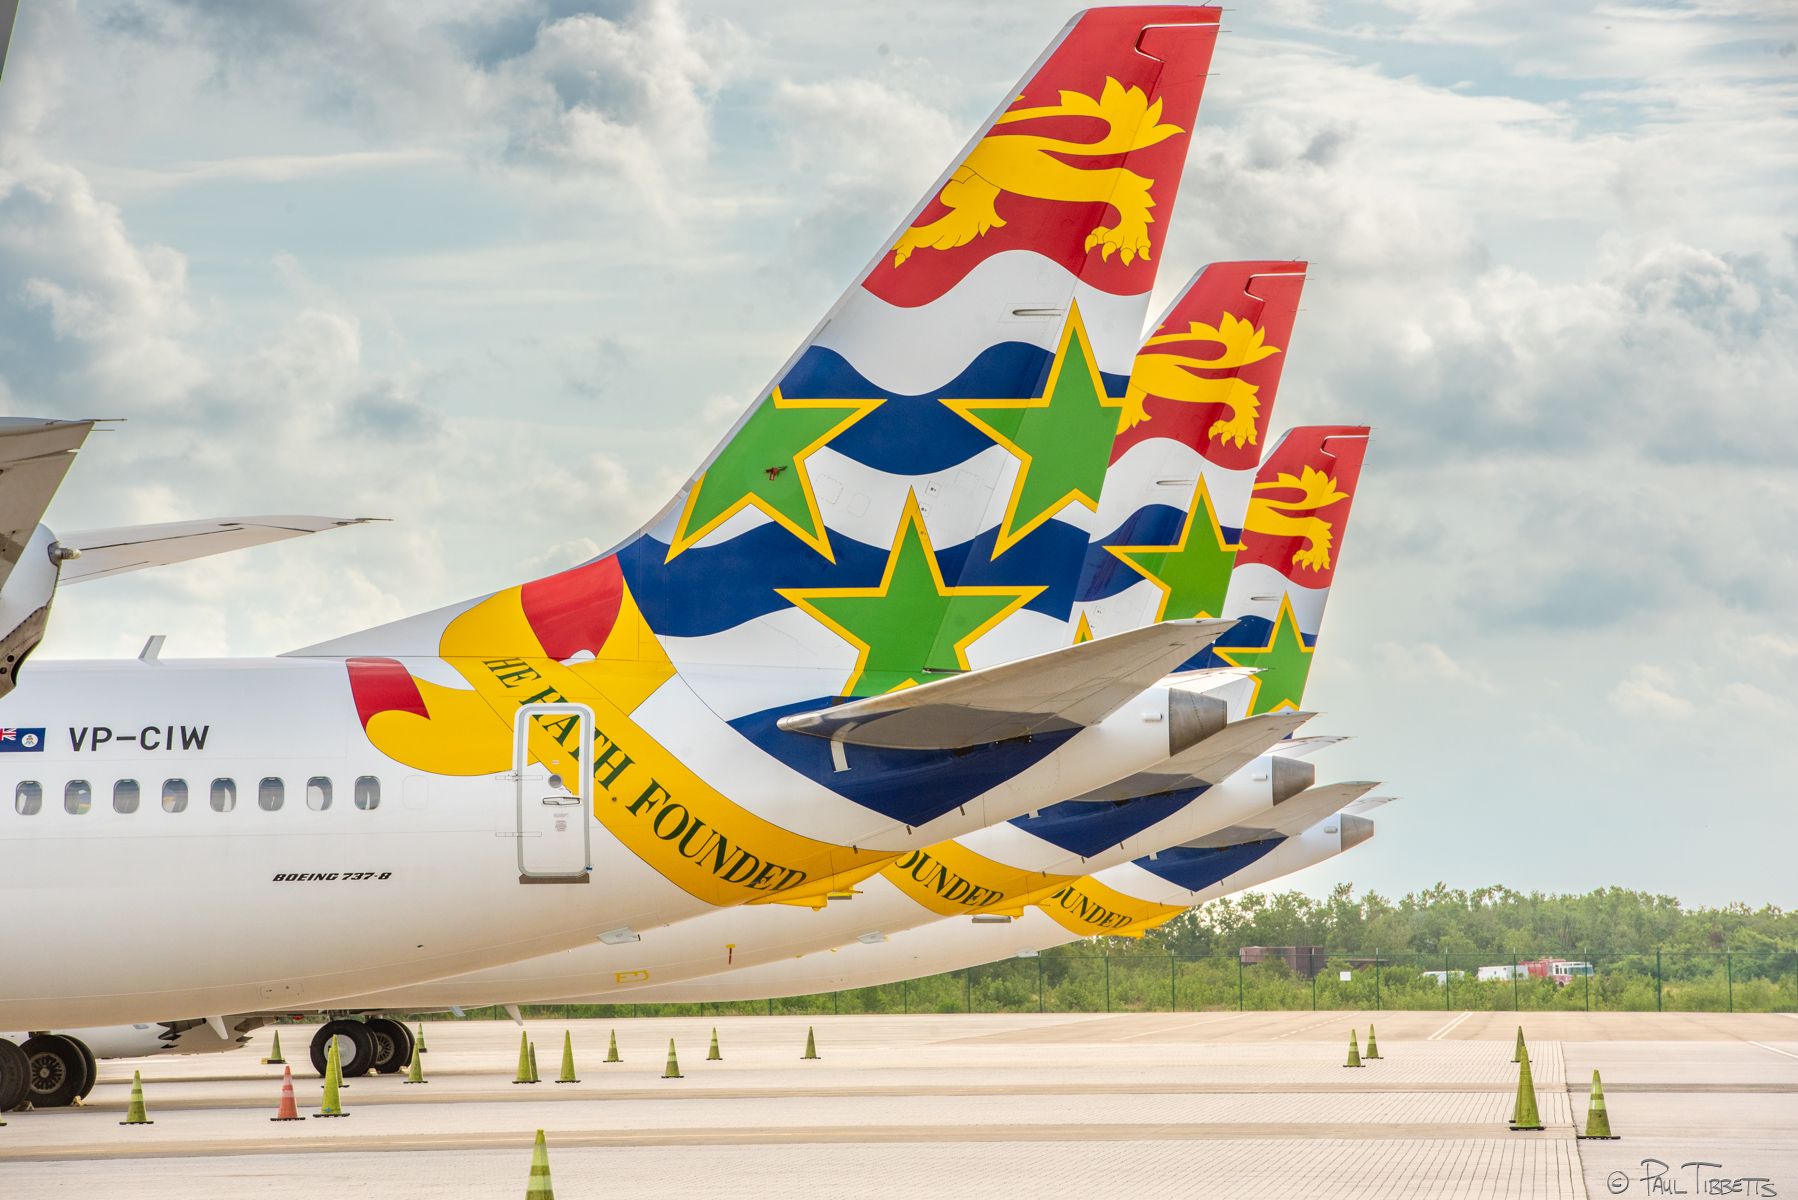 Several Cayman Airways Boeing 737 MAX 8 aircraft parked at an airport.